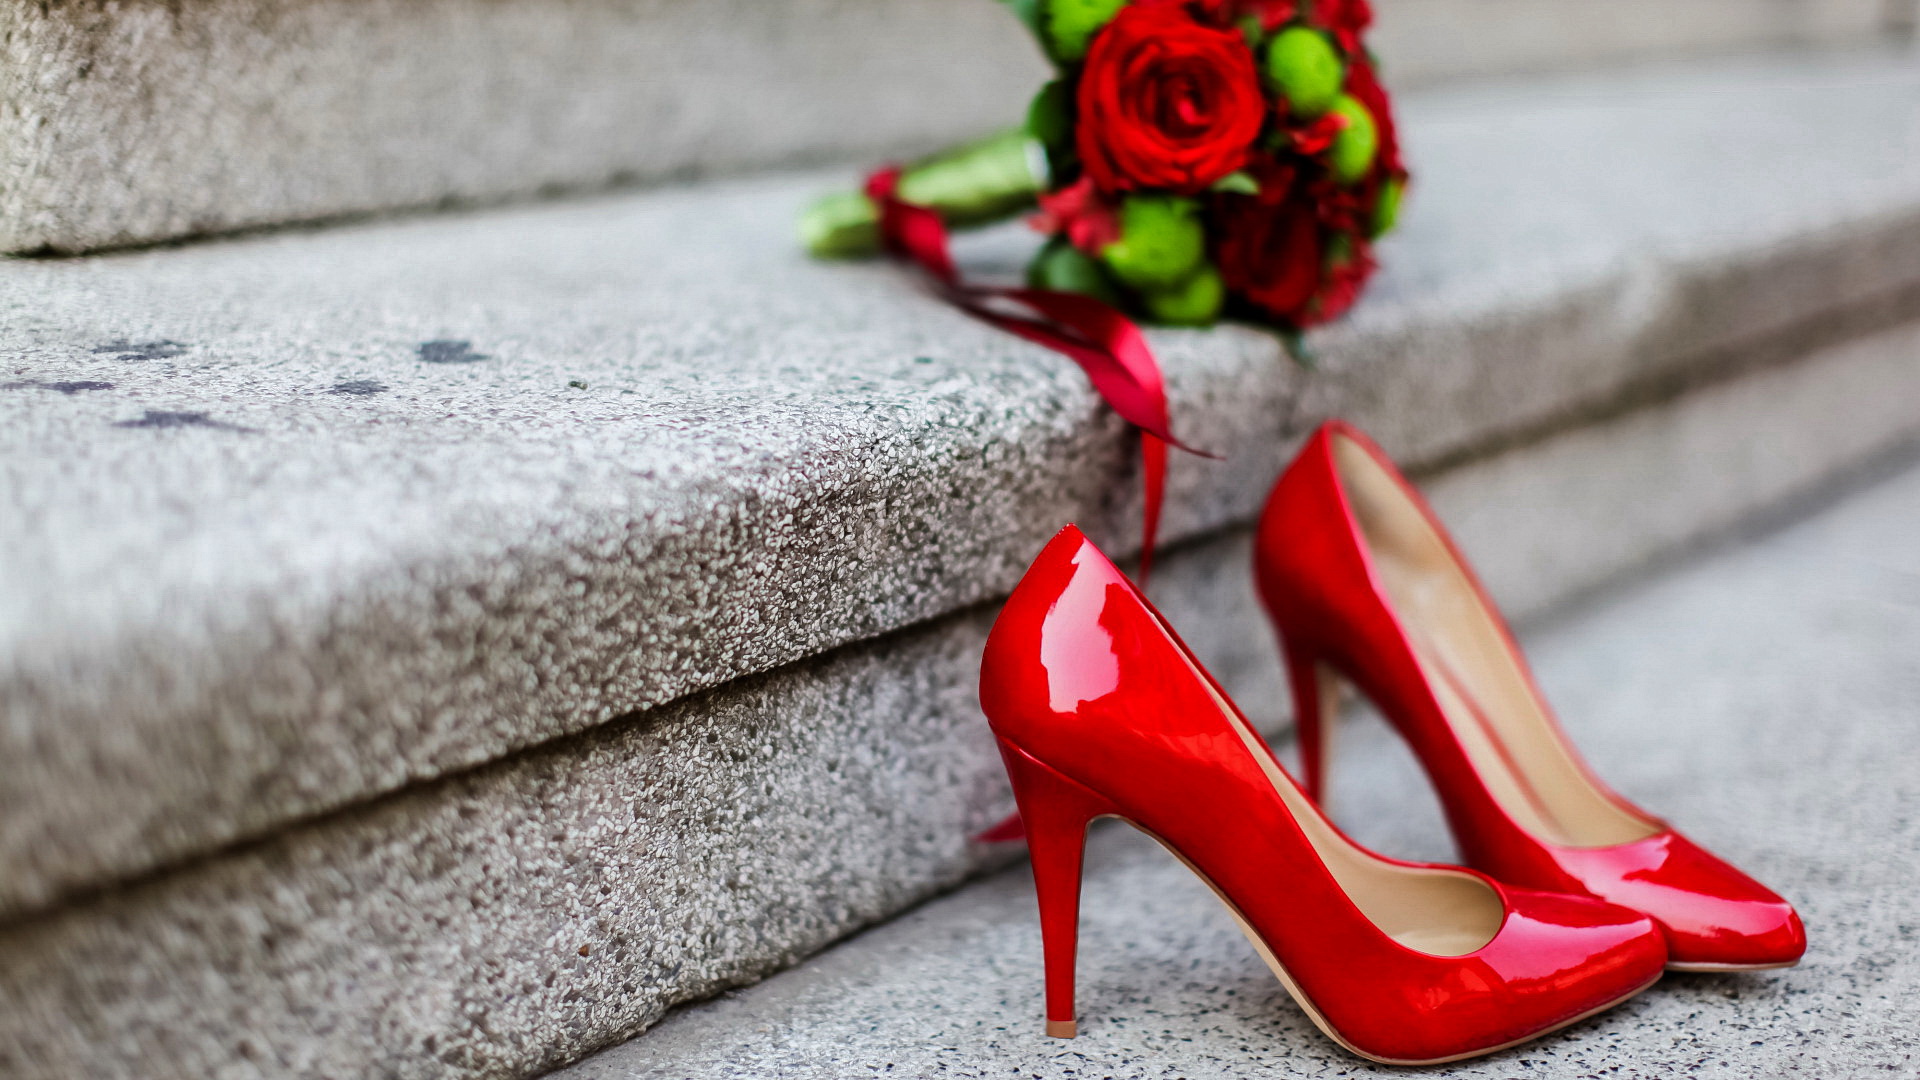 Photo of the bouquet and shoes